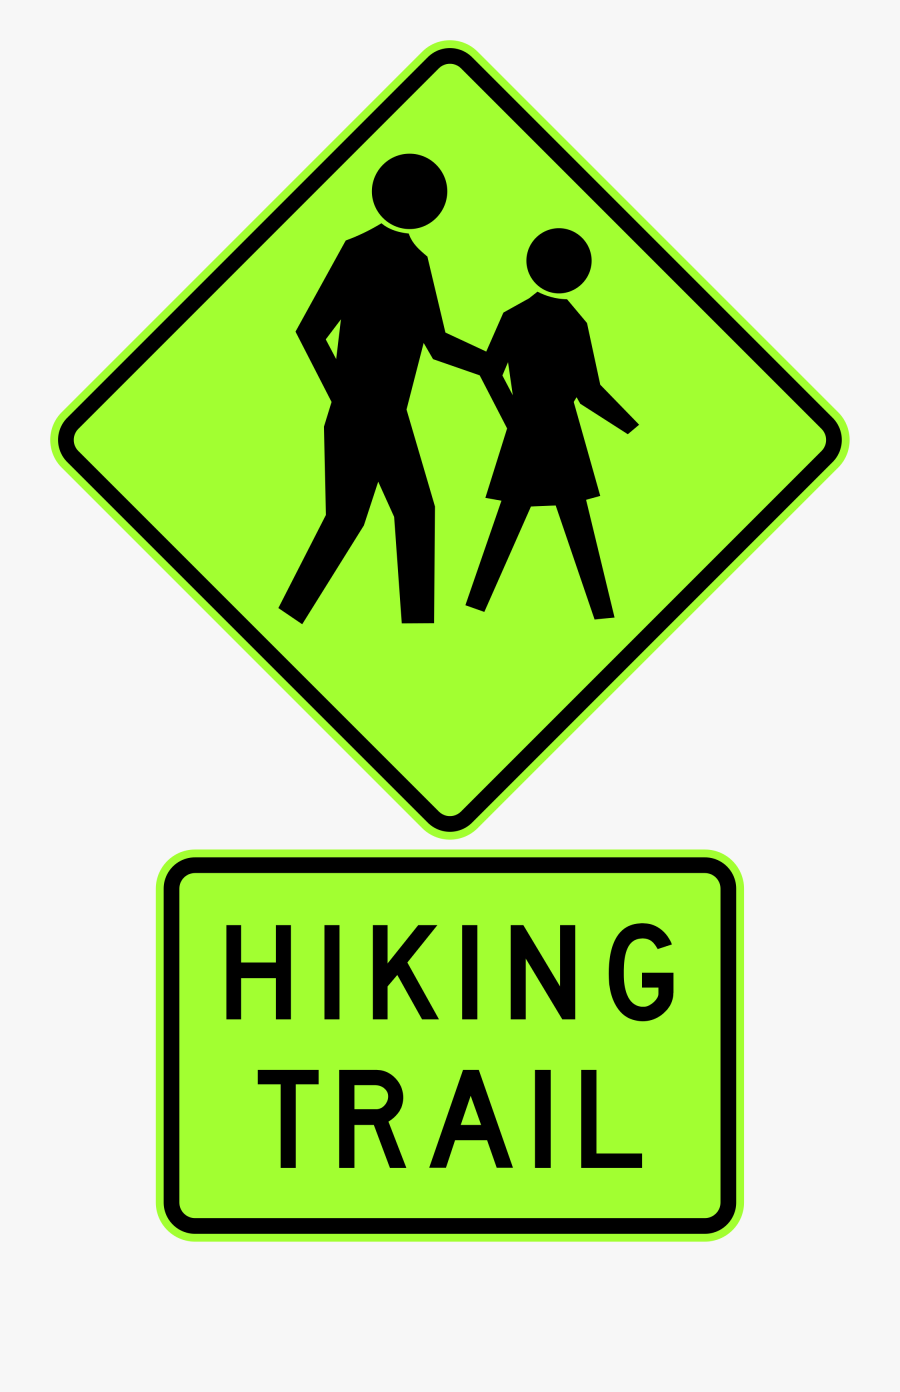 Does The Sign With Two People Walking Mean Clipart - Does The Sign With Two People Walking Mean, Transparent Clipart